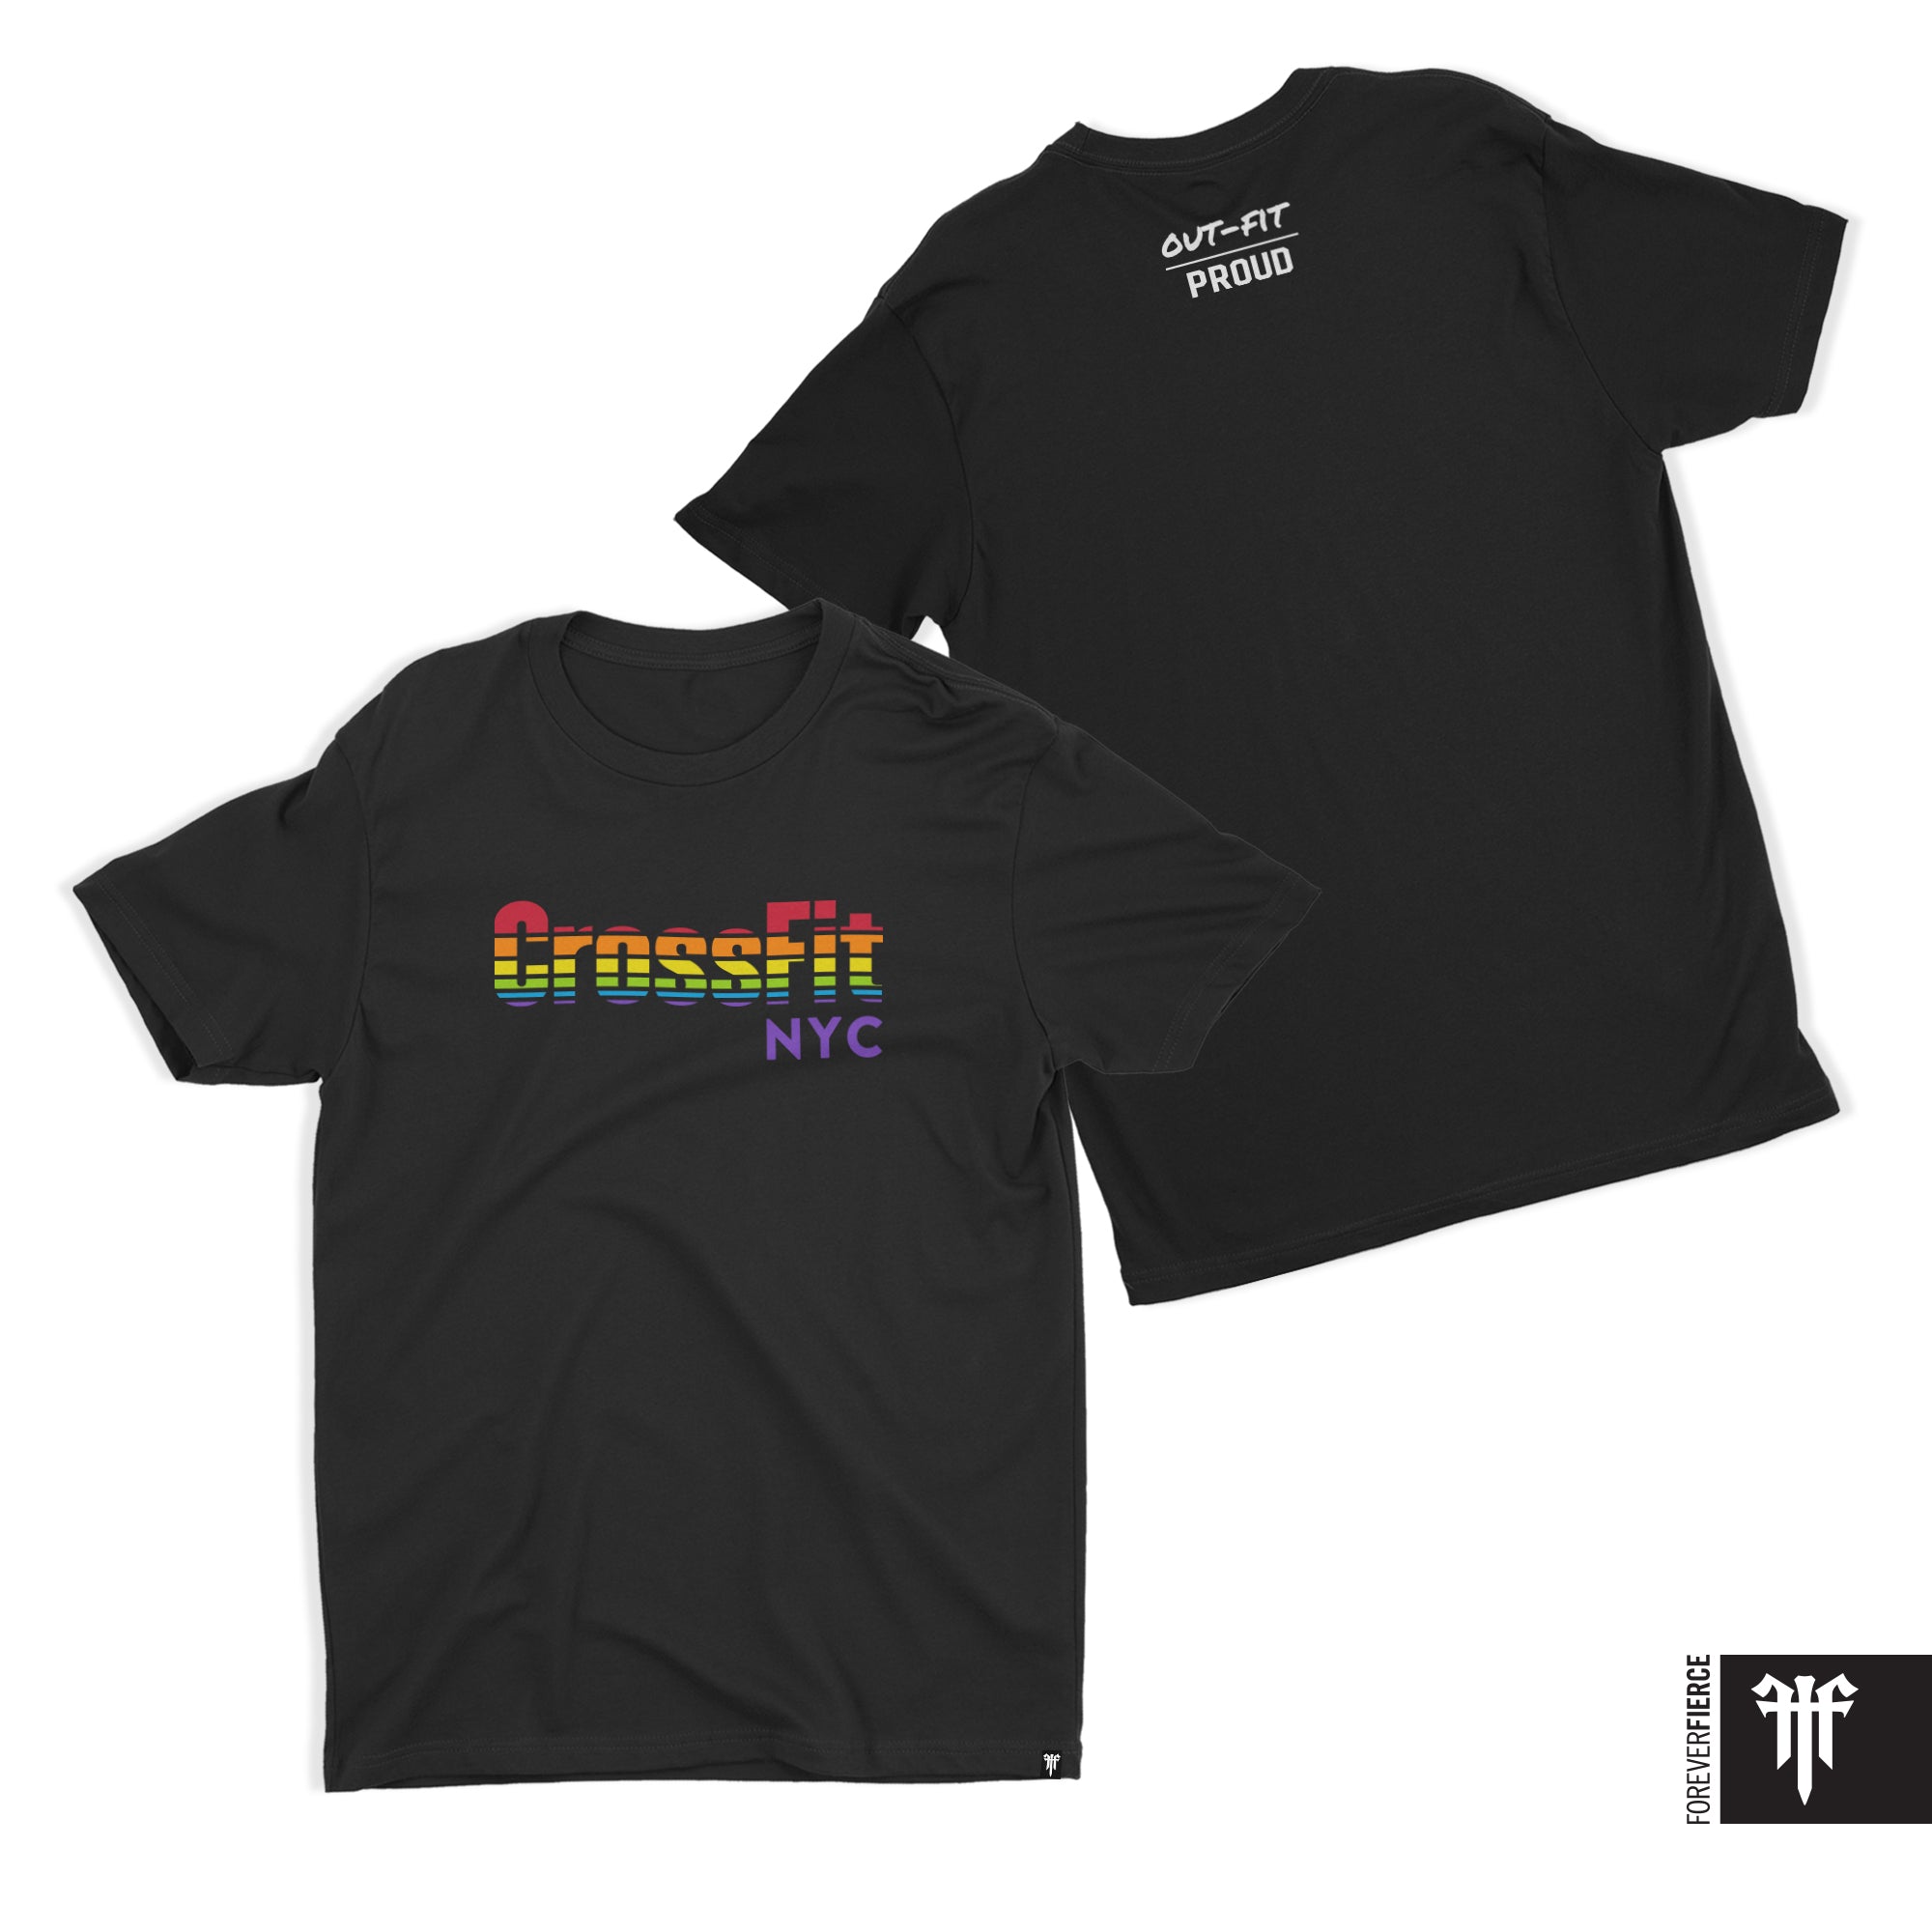 CrossFit NYC Pride – OUT-FIT | PROUD